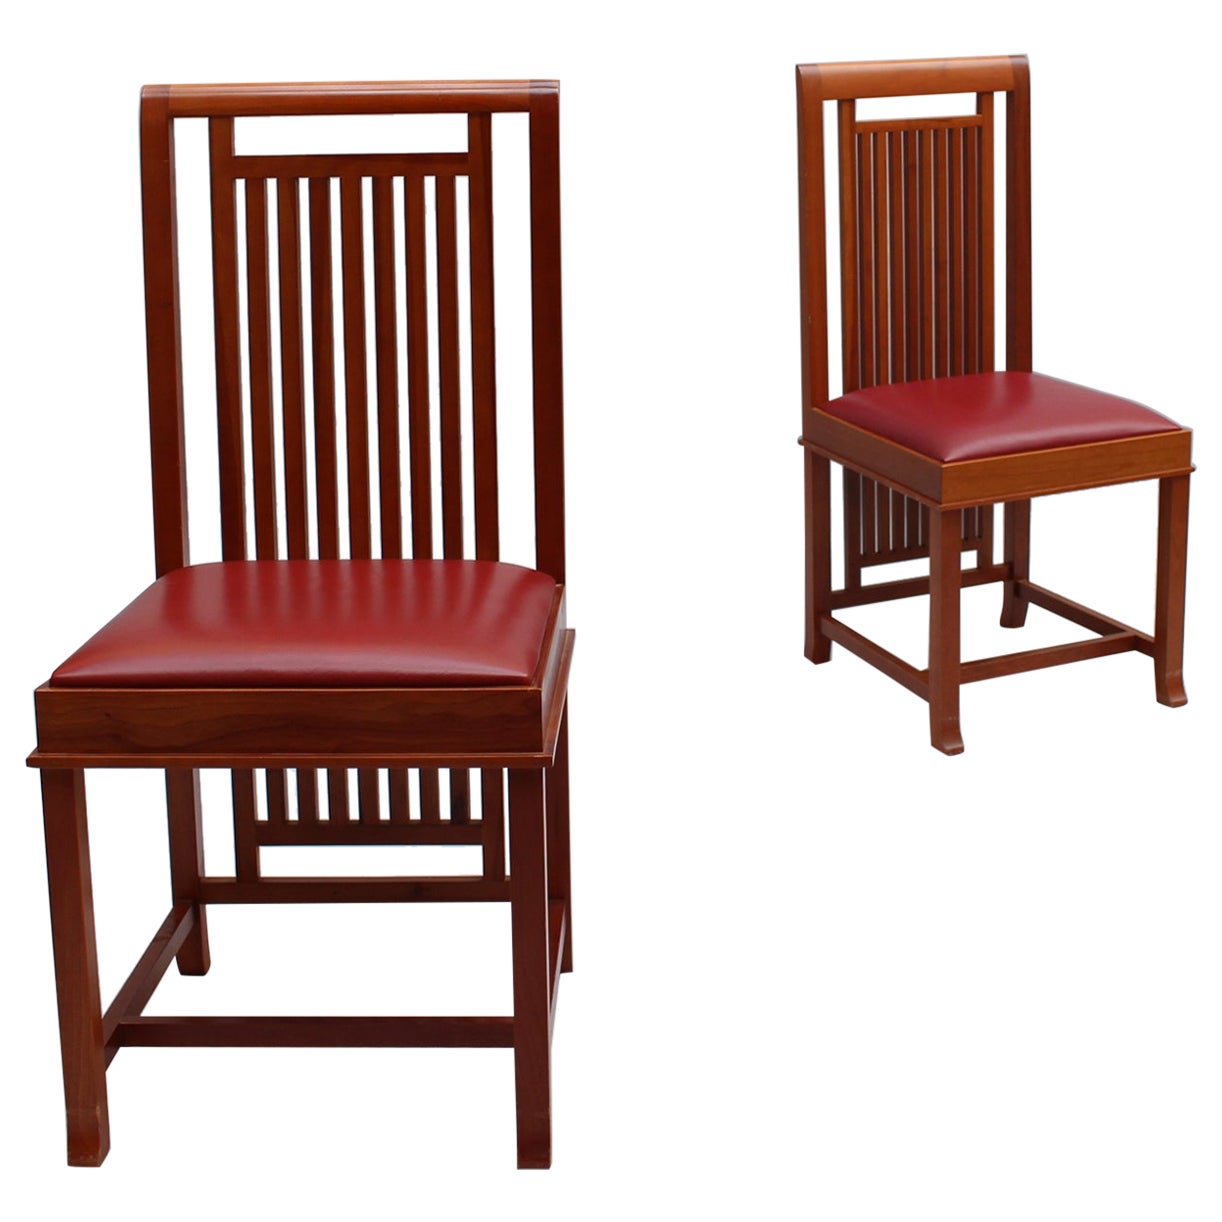 Pair of Frank Lloyd Wright "Coonley 2" Chairs, Cassina Edition For Sale